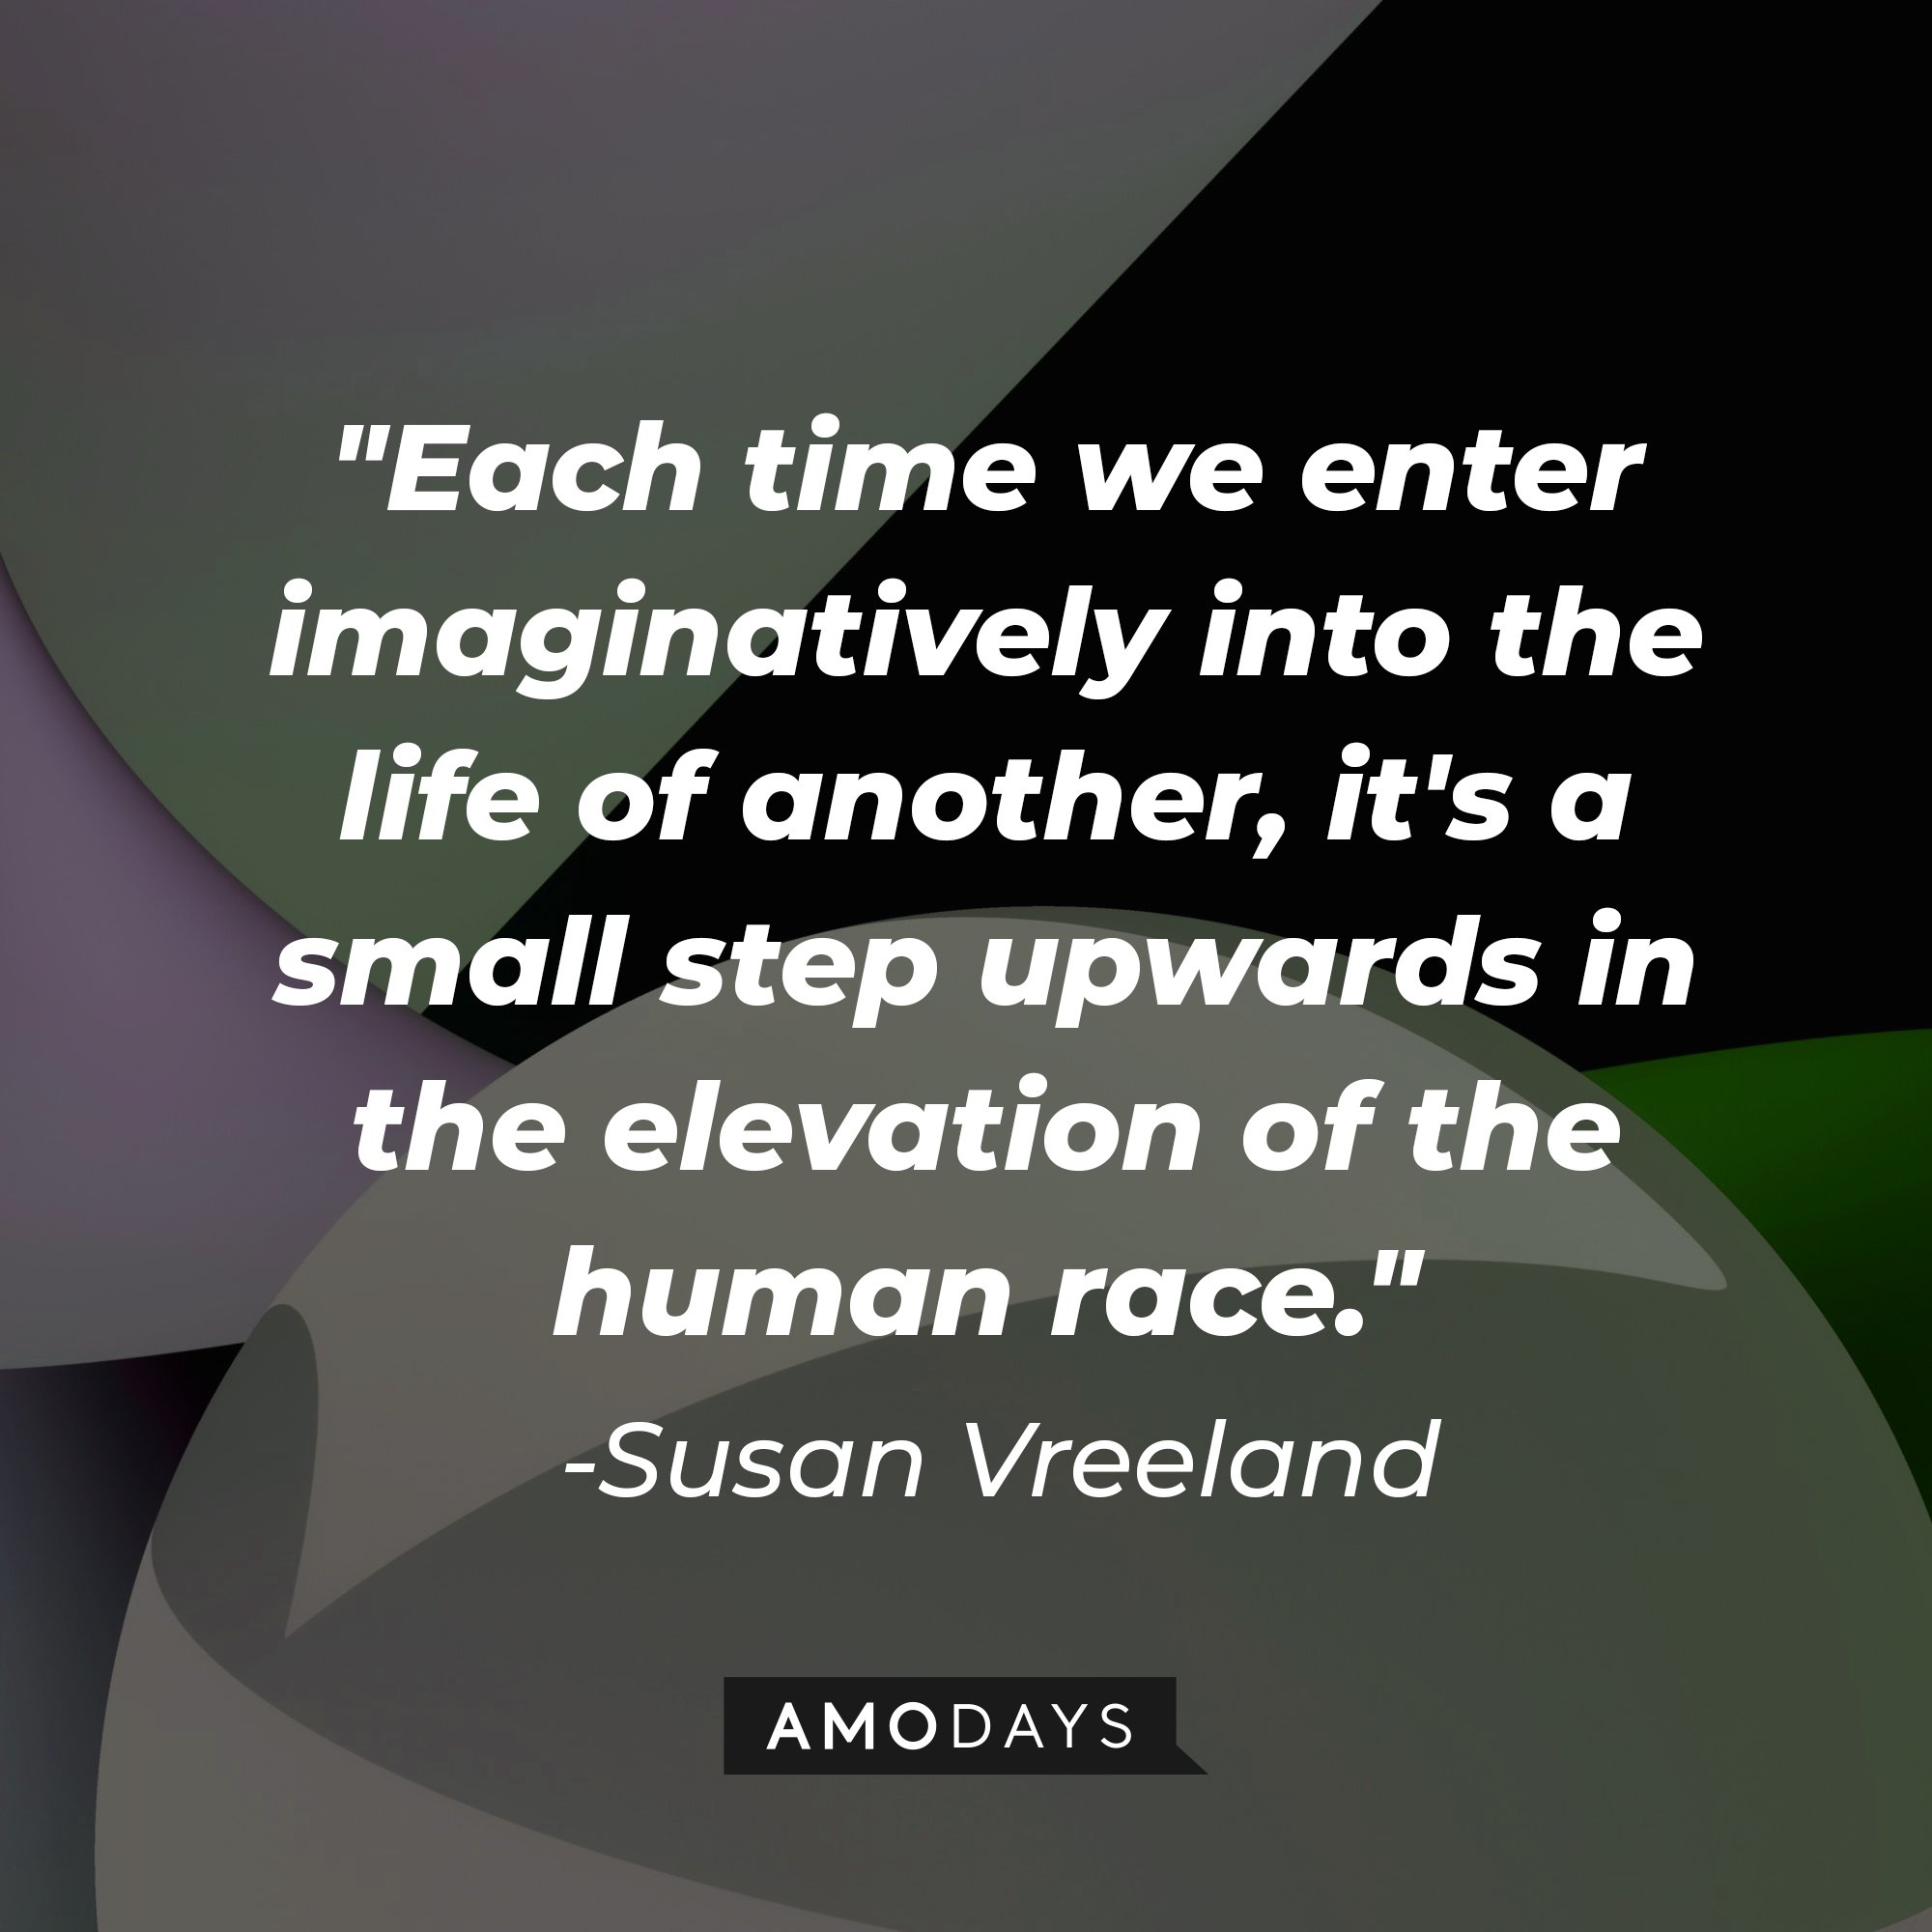 Susan Vreeland’s quote: "Each time we enter imaginatively into the life of another, it's a small step upwards in the elevation of the human race." | Image: AmoDays